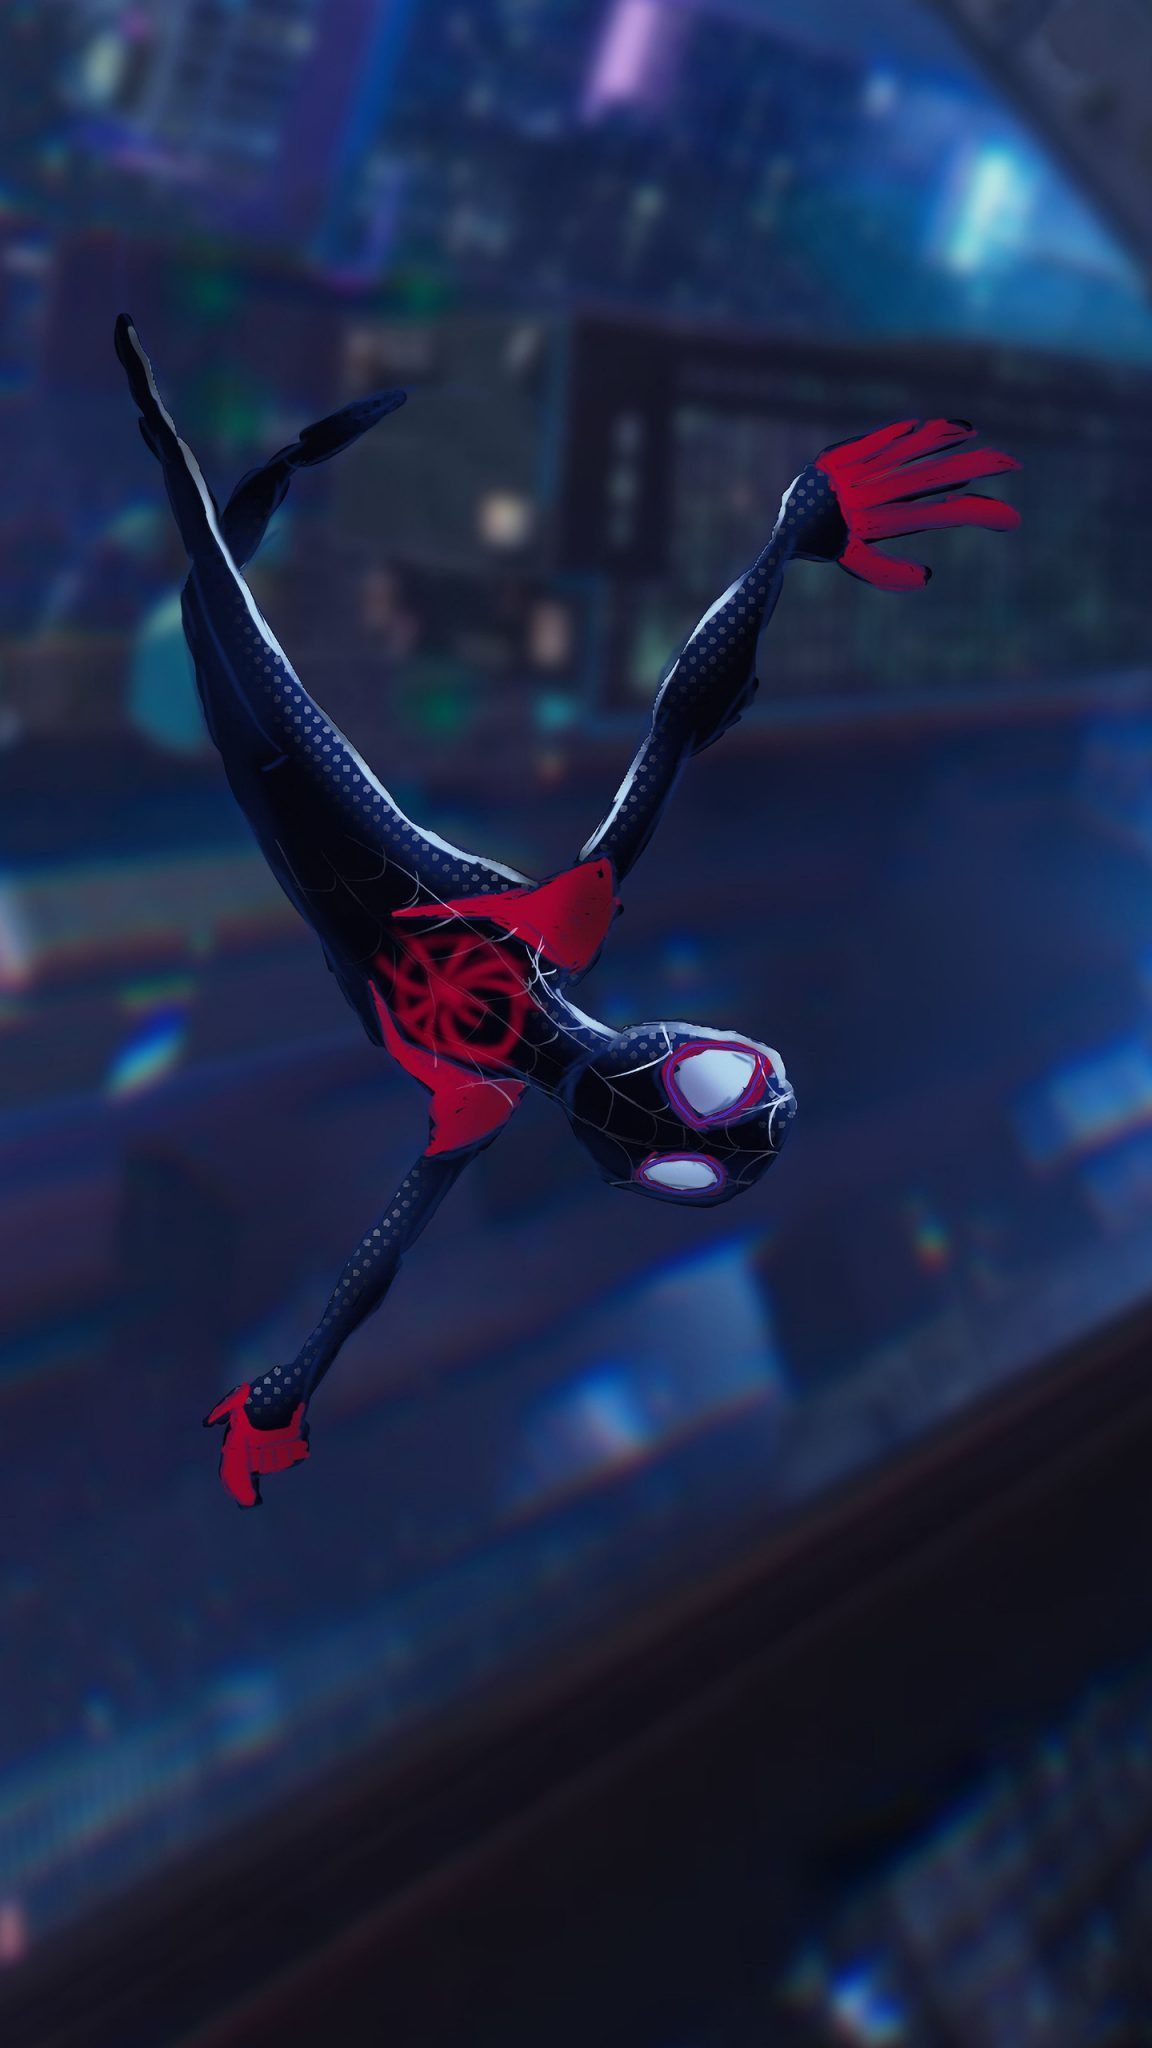 Free Download Top Spiderman Wallpaper PS4 Homecoming Into The Spider Verse [1152x2048] For Your Desktop, Mobile & Tablet. Explore Spider Man Homecoming Spectacular Free Wallpaper. Spider Man Homecoming Spectacular Free Wallpaper